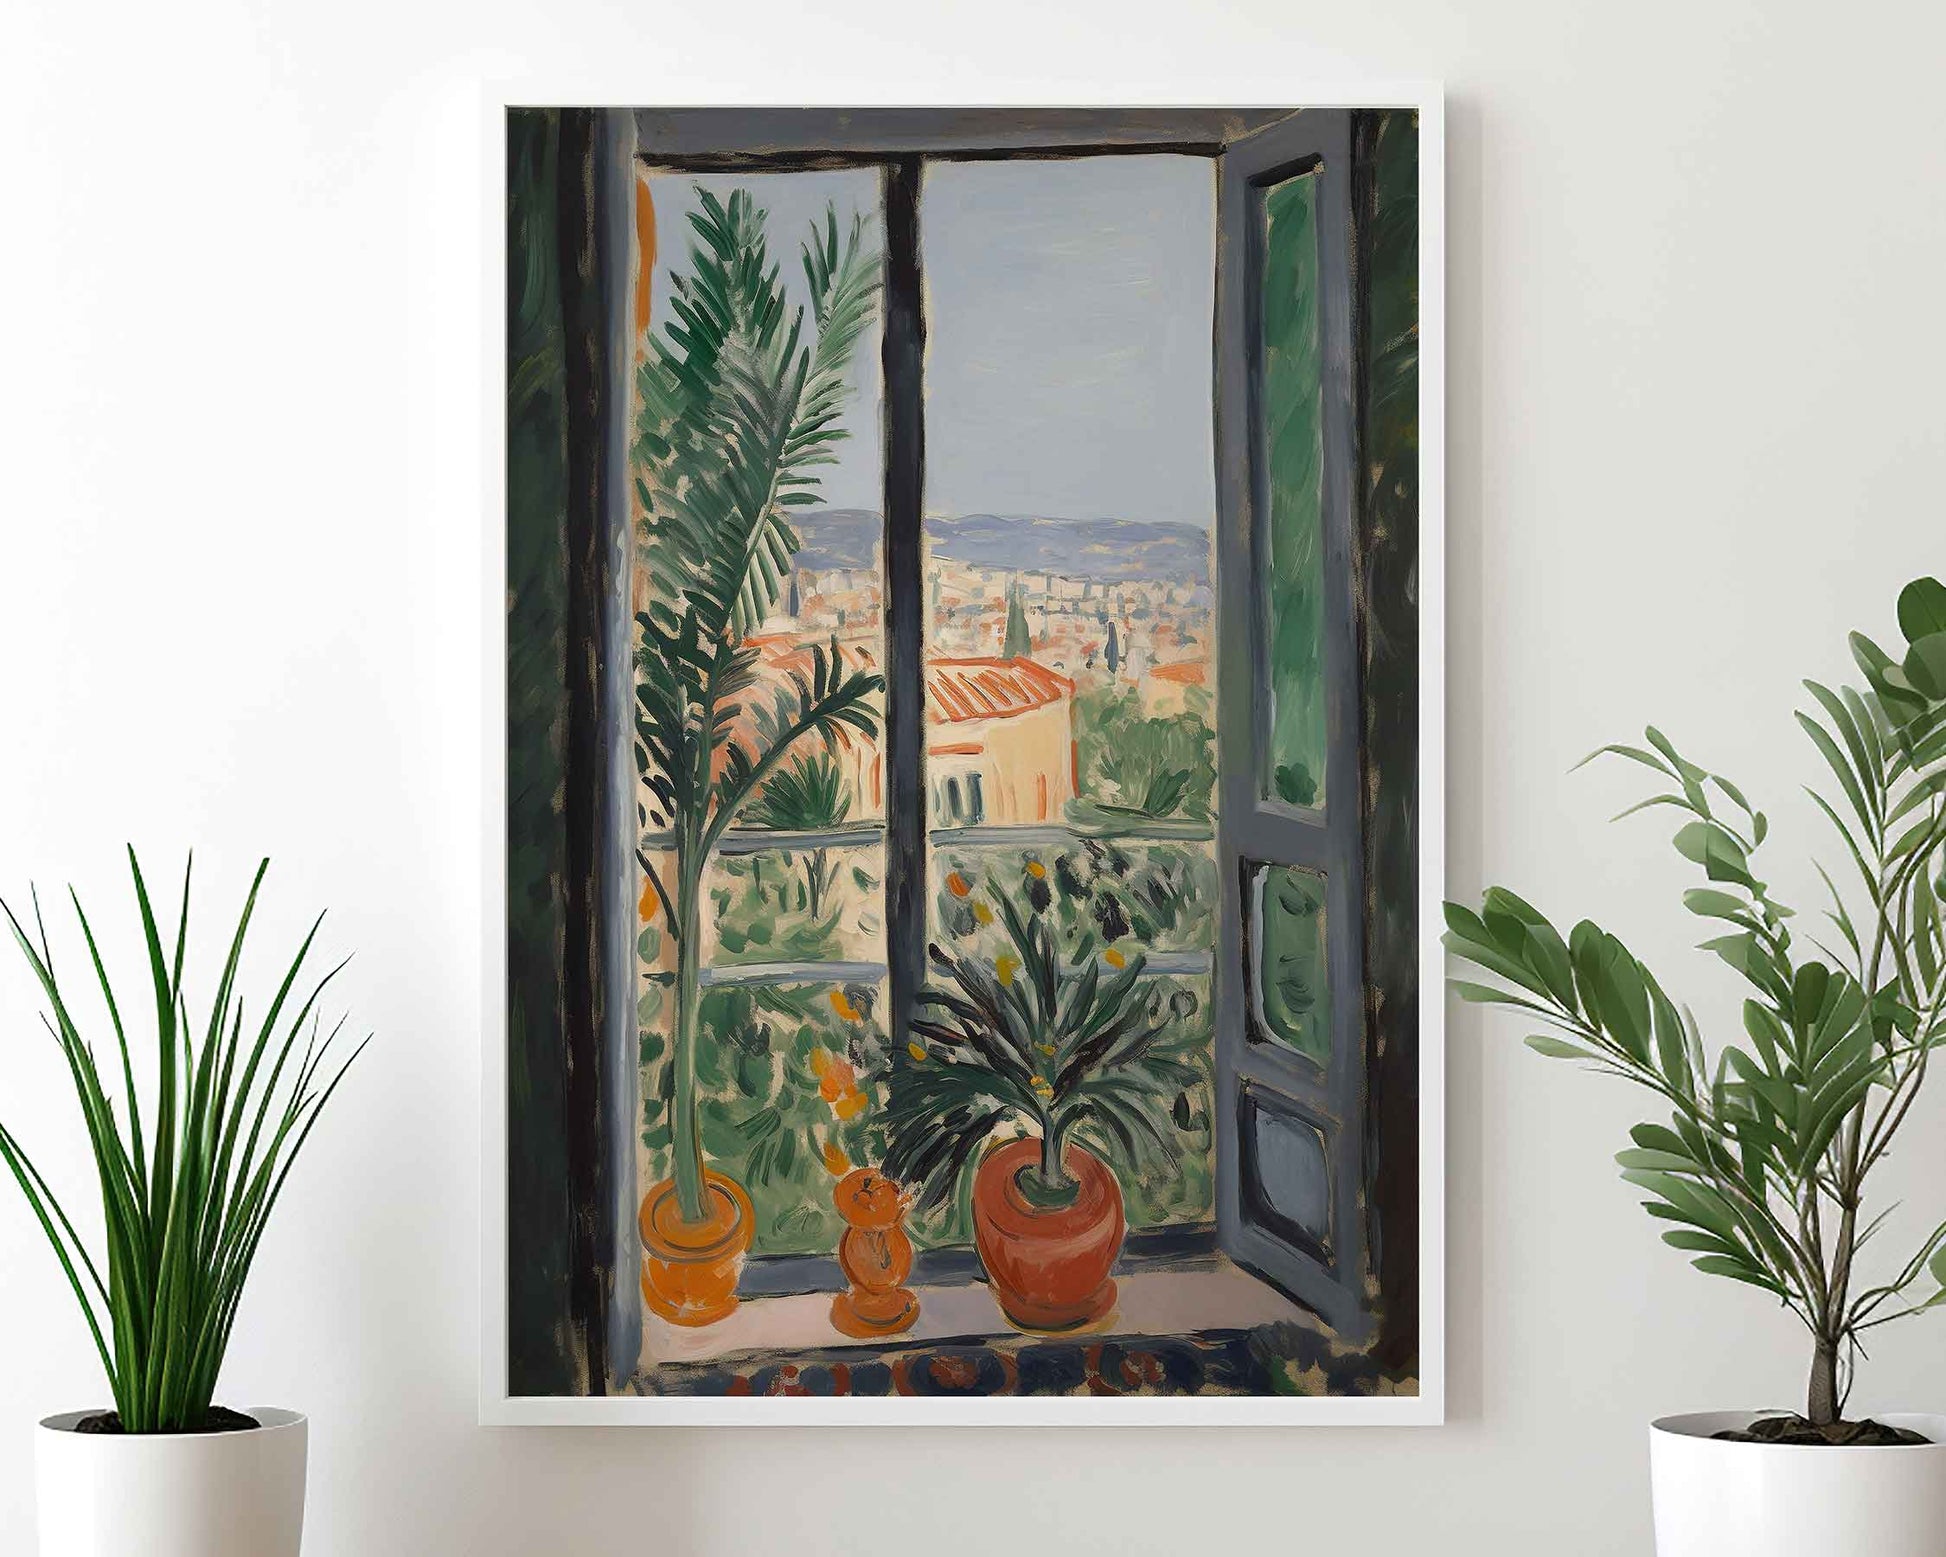 Framed Image of Matisse Style Wall Art Prints Garden & Window Oil Paintings Posters